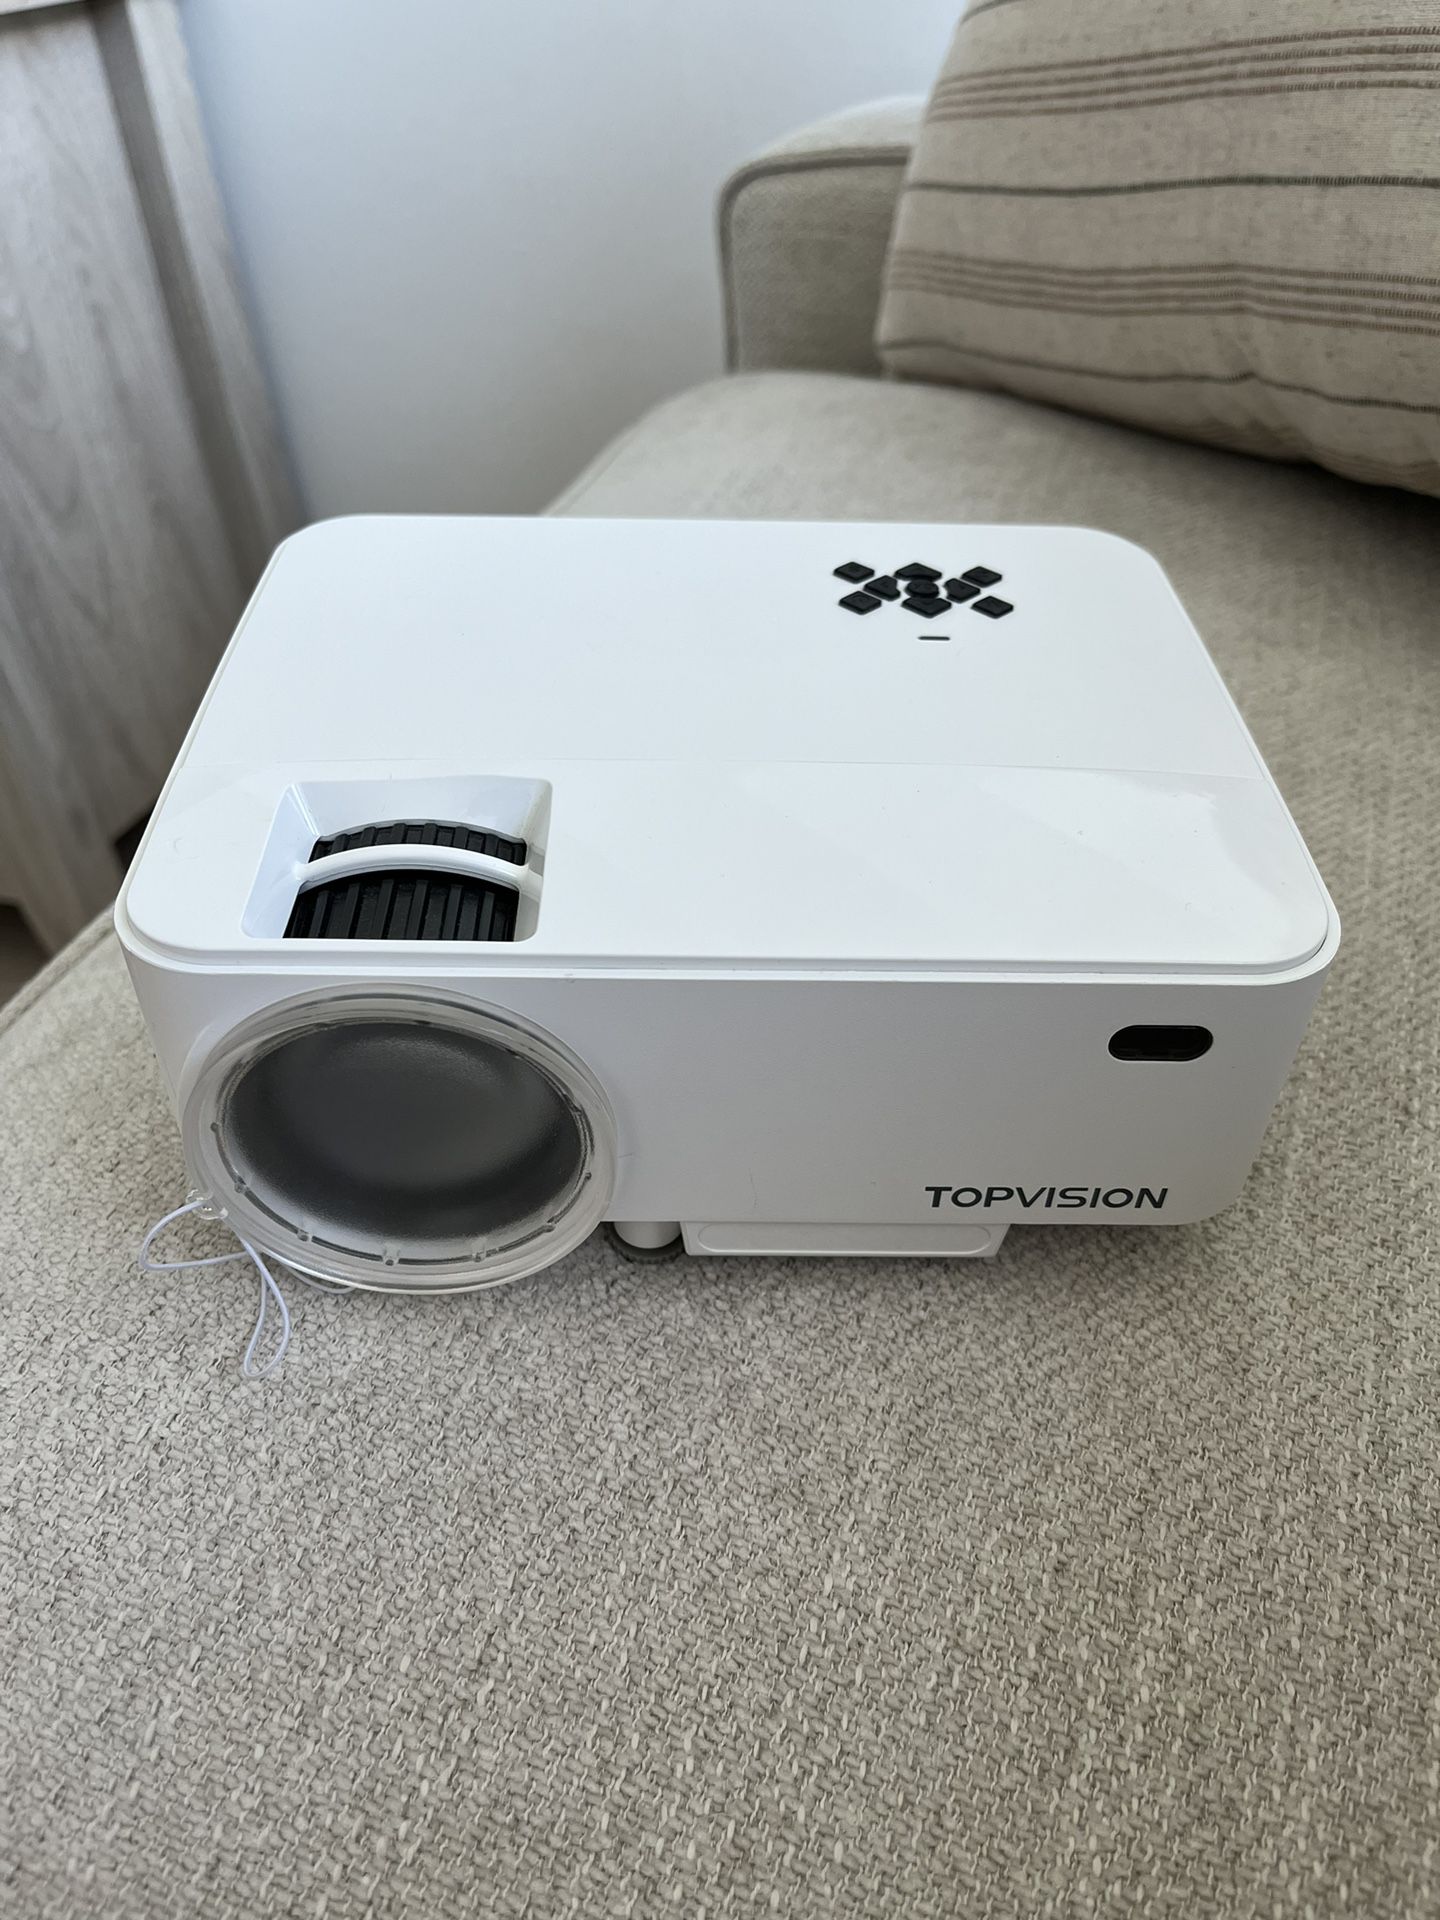 Topvision Mini Projector with Firestick